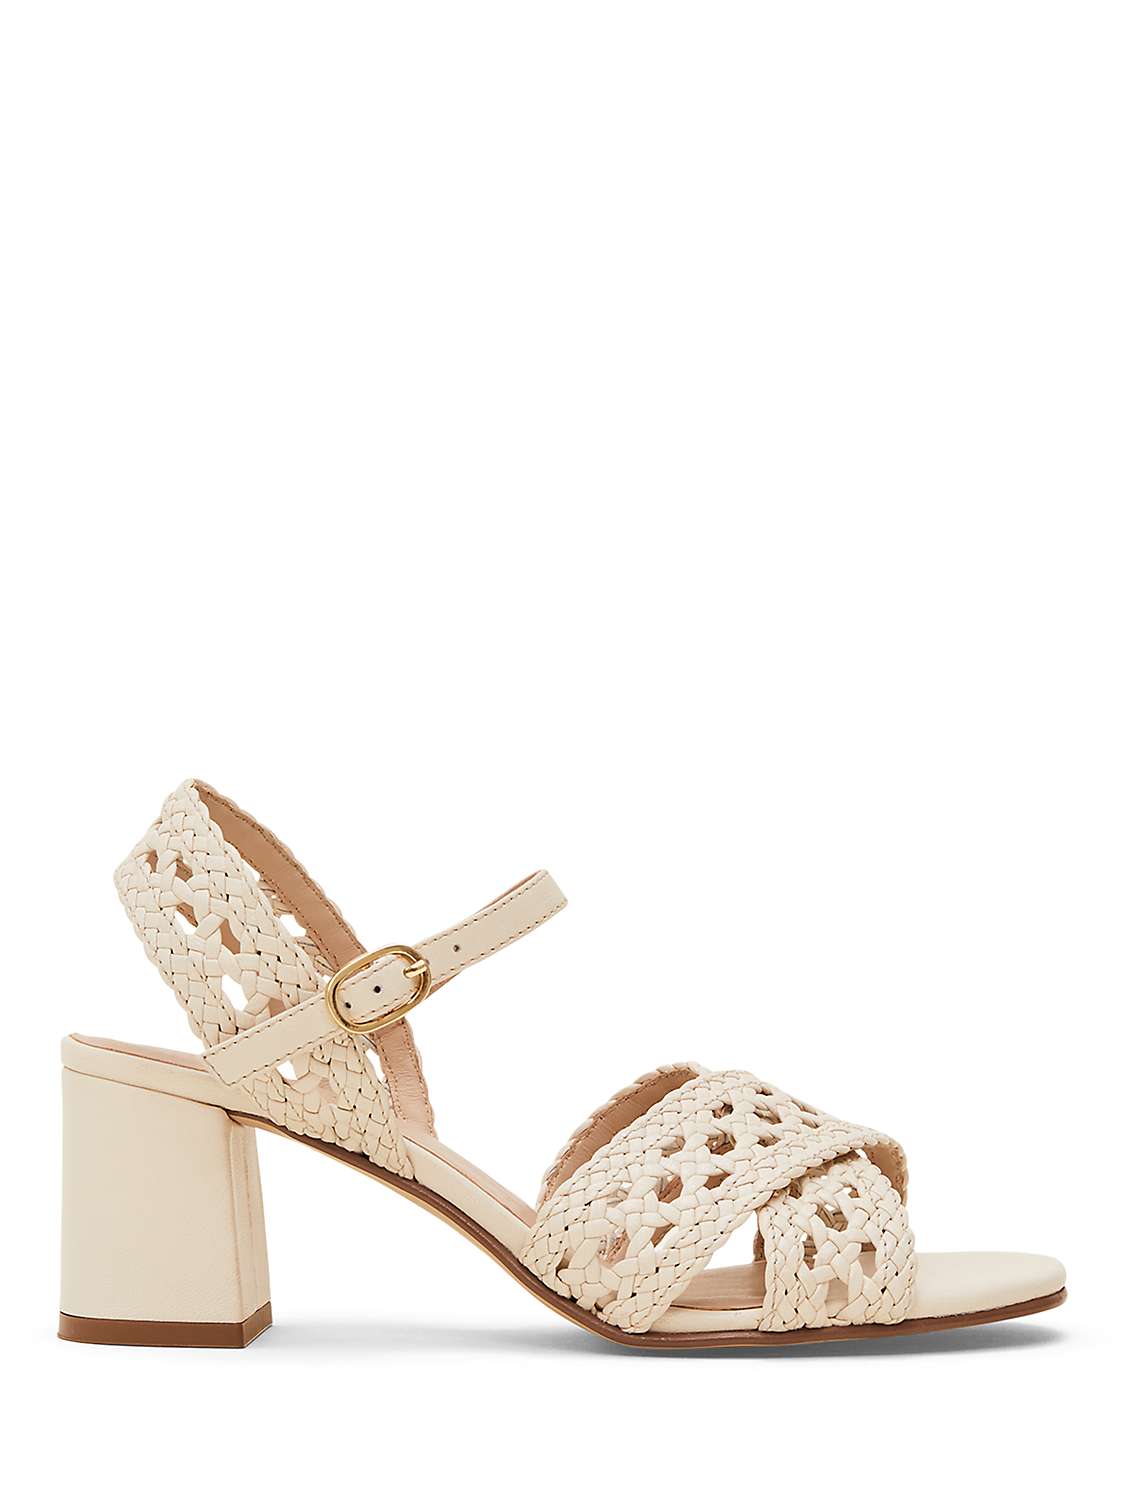 Buy Phase Eight Woven Leather Block Heel Sandals, Cream Online at johnlewis.com